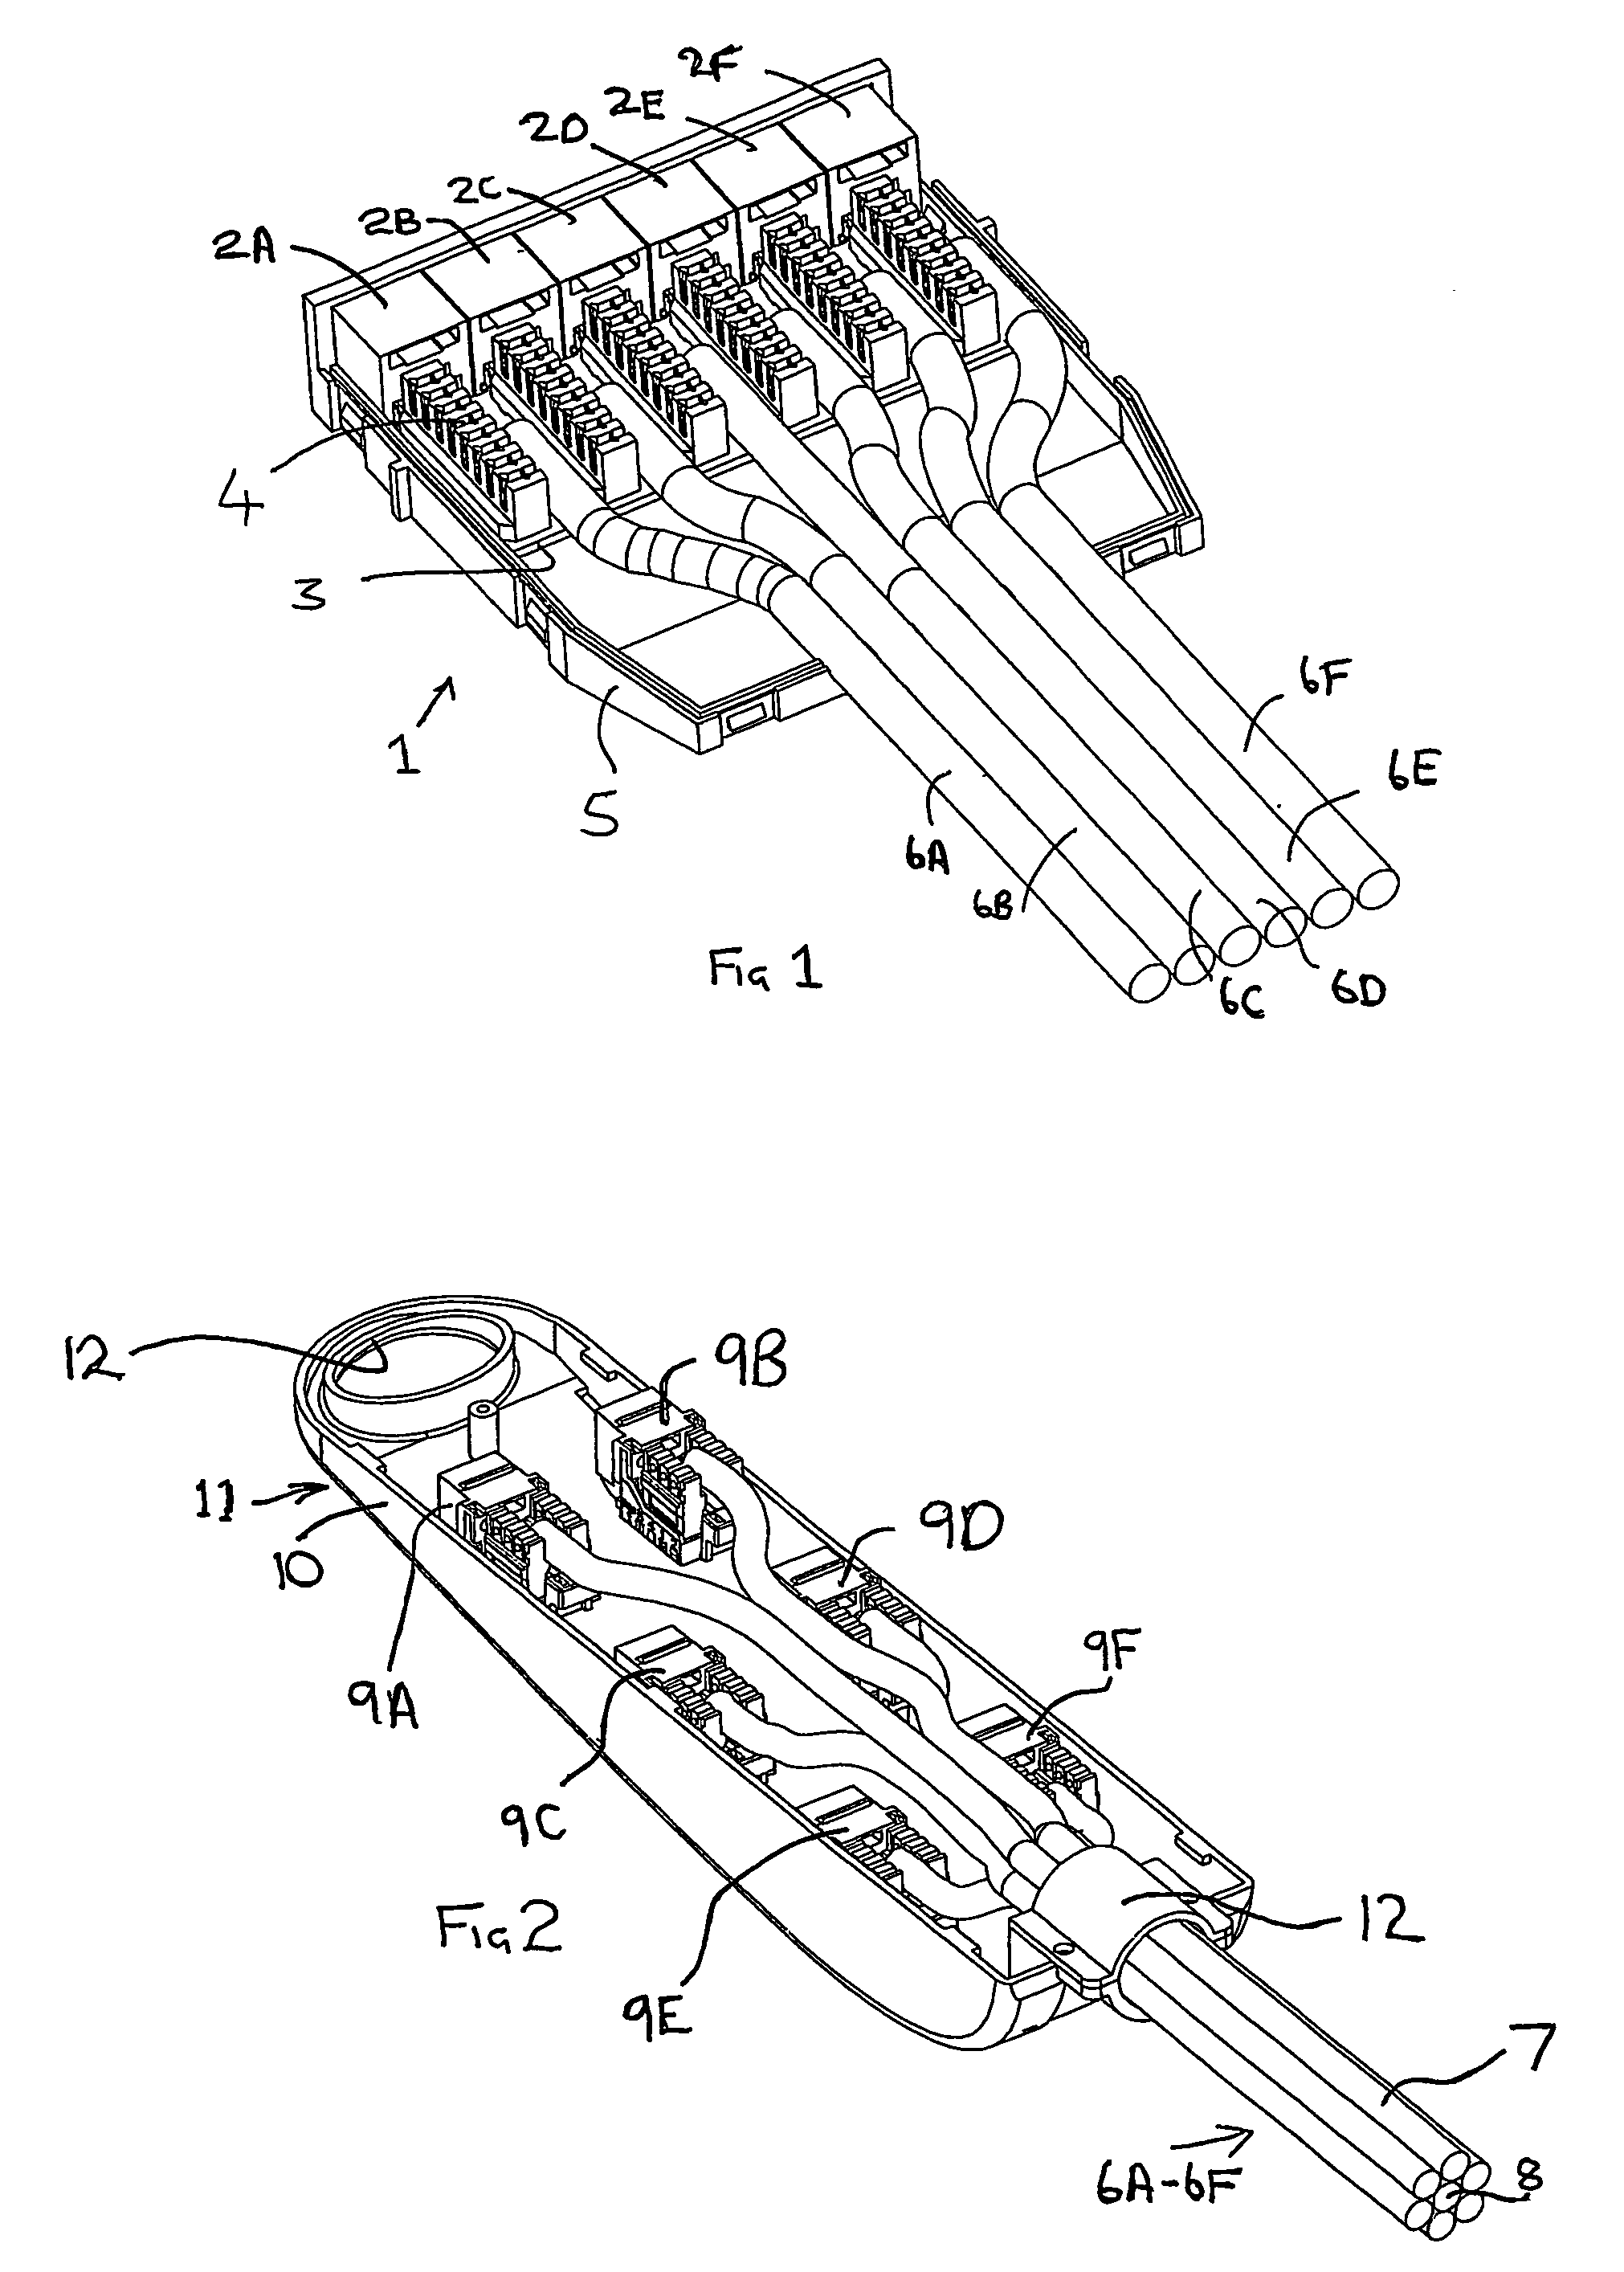 Structured cabling system and method